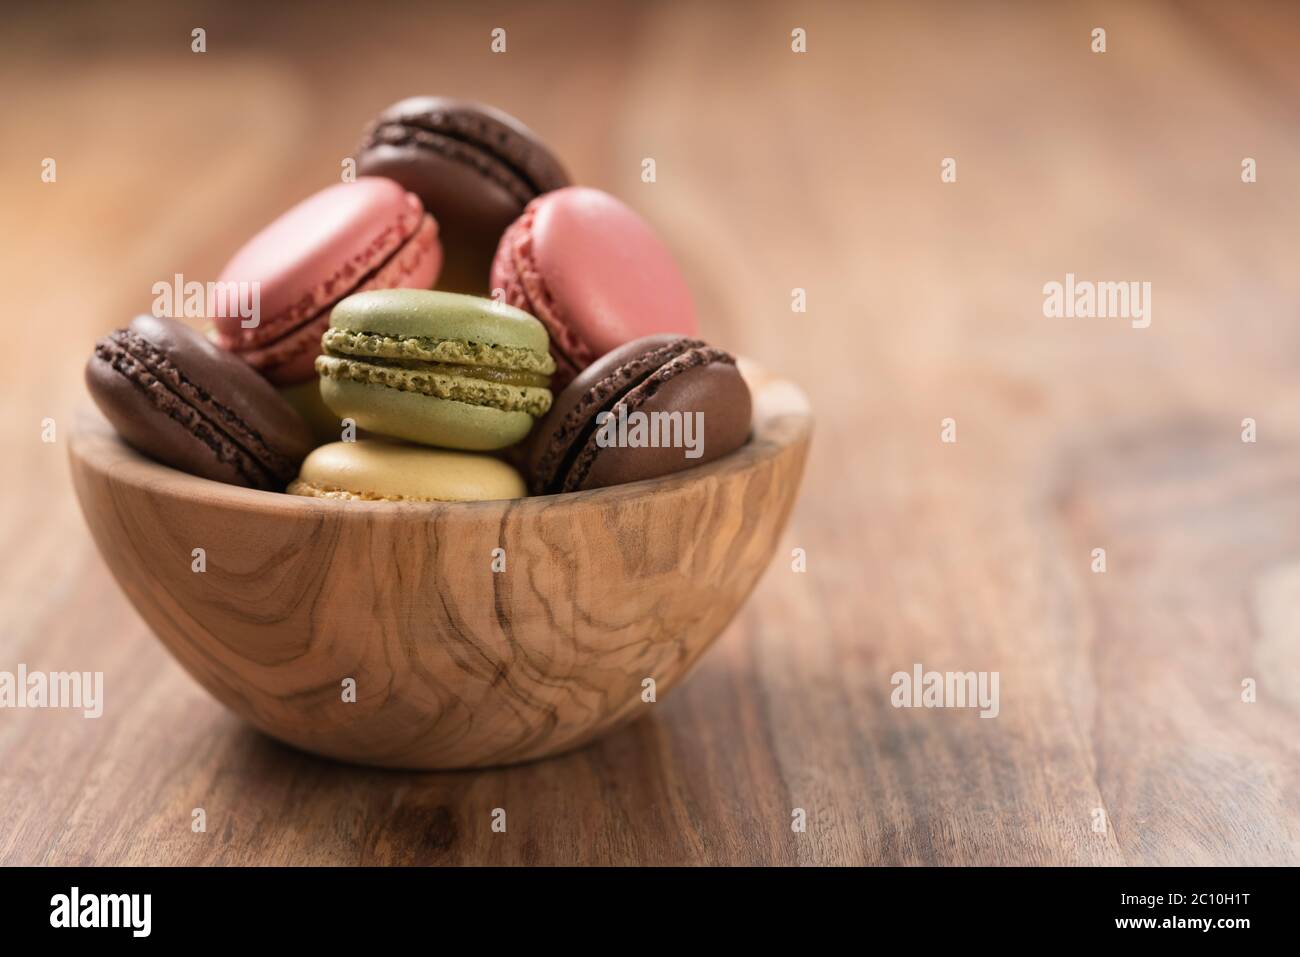 Various french macarons in olive wood bowl with copy space Stock Photo